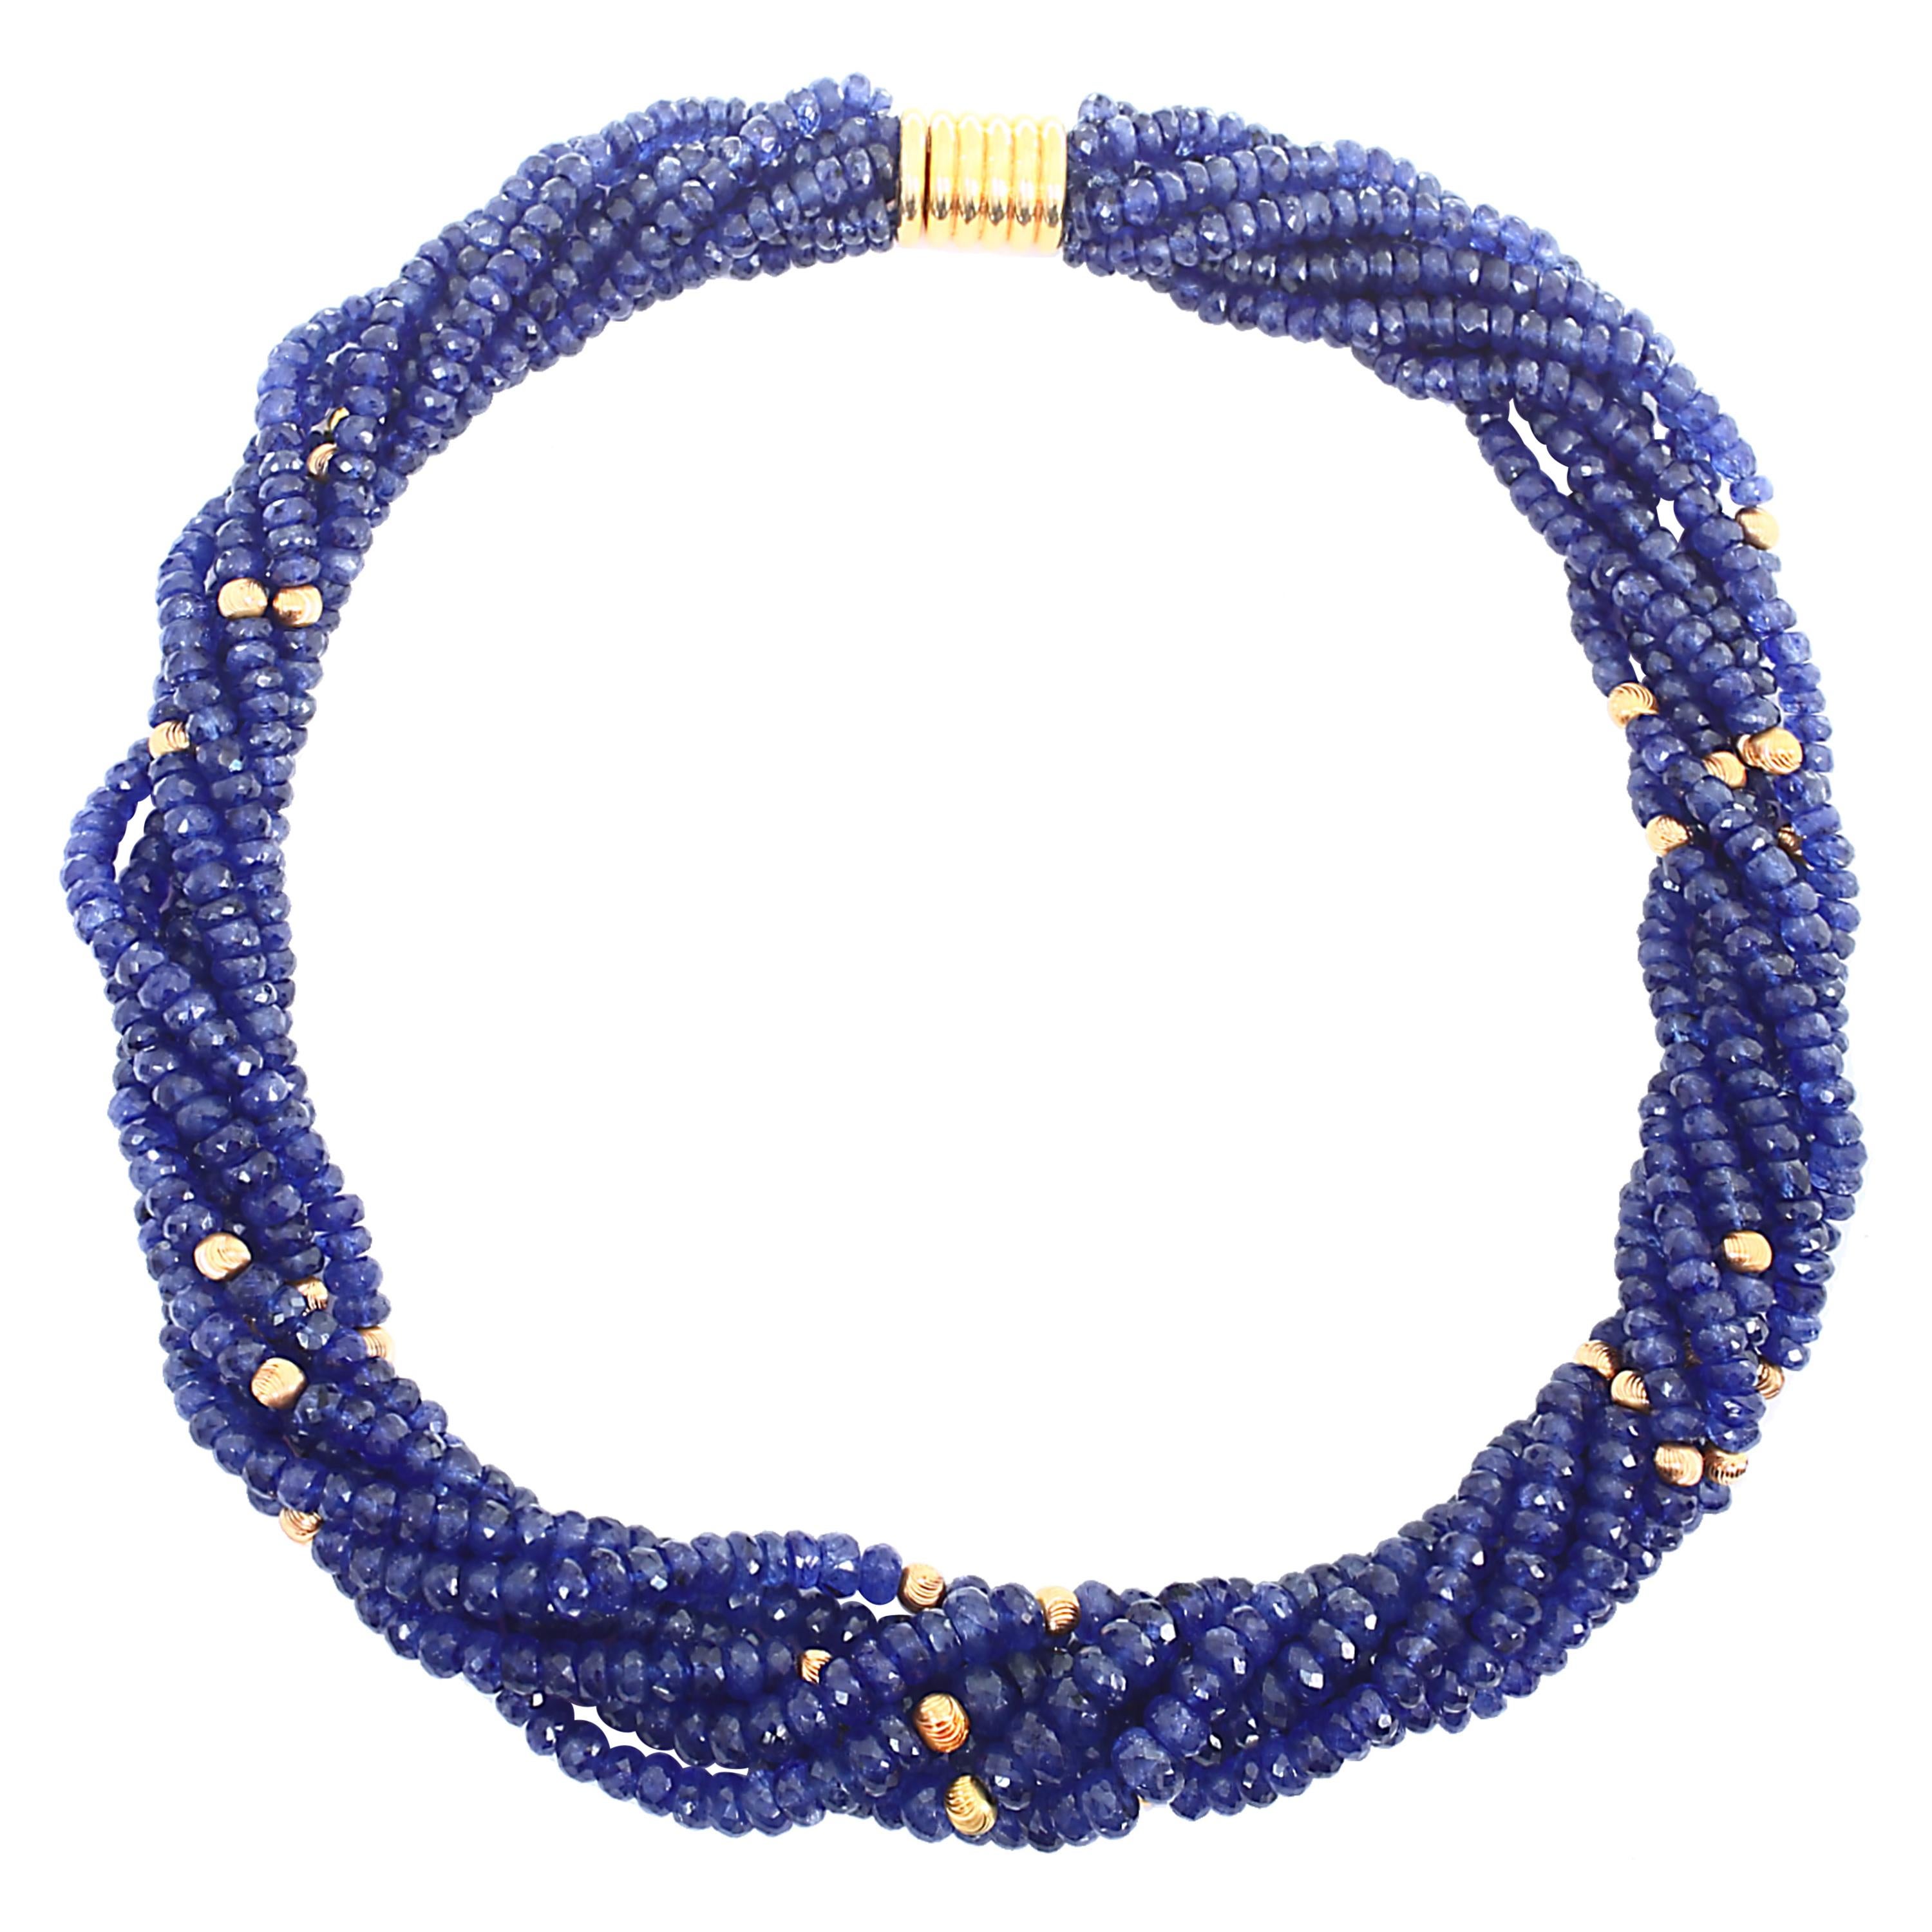 Twisted 1275 Ct Natural Tanzanite Bead Seven Strand Necklace + 15 Gm 14 K Y Gold